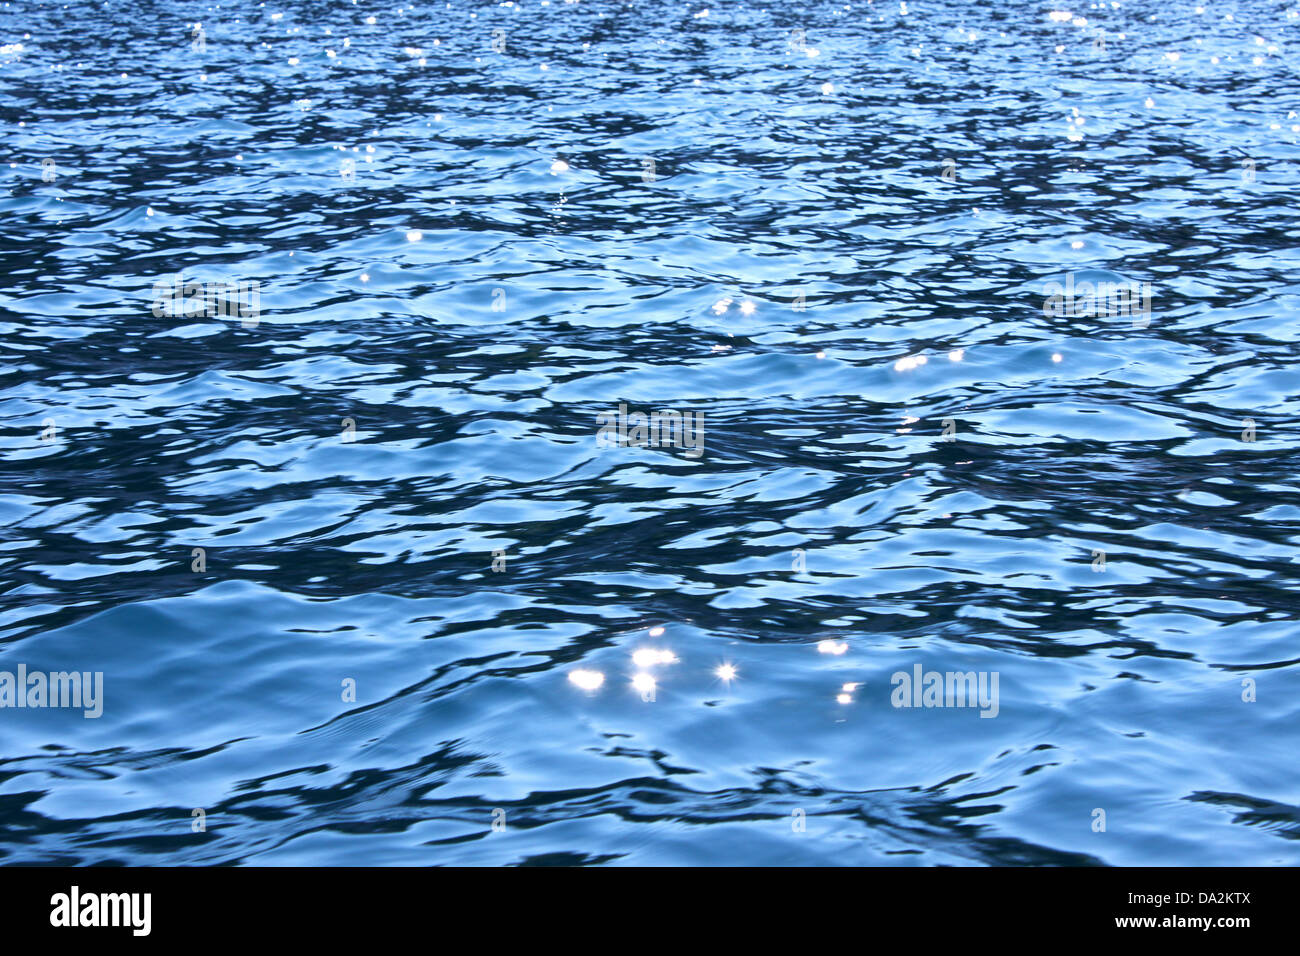 this is a sparkling surface of Adriatic sea Stock Photo